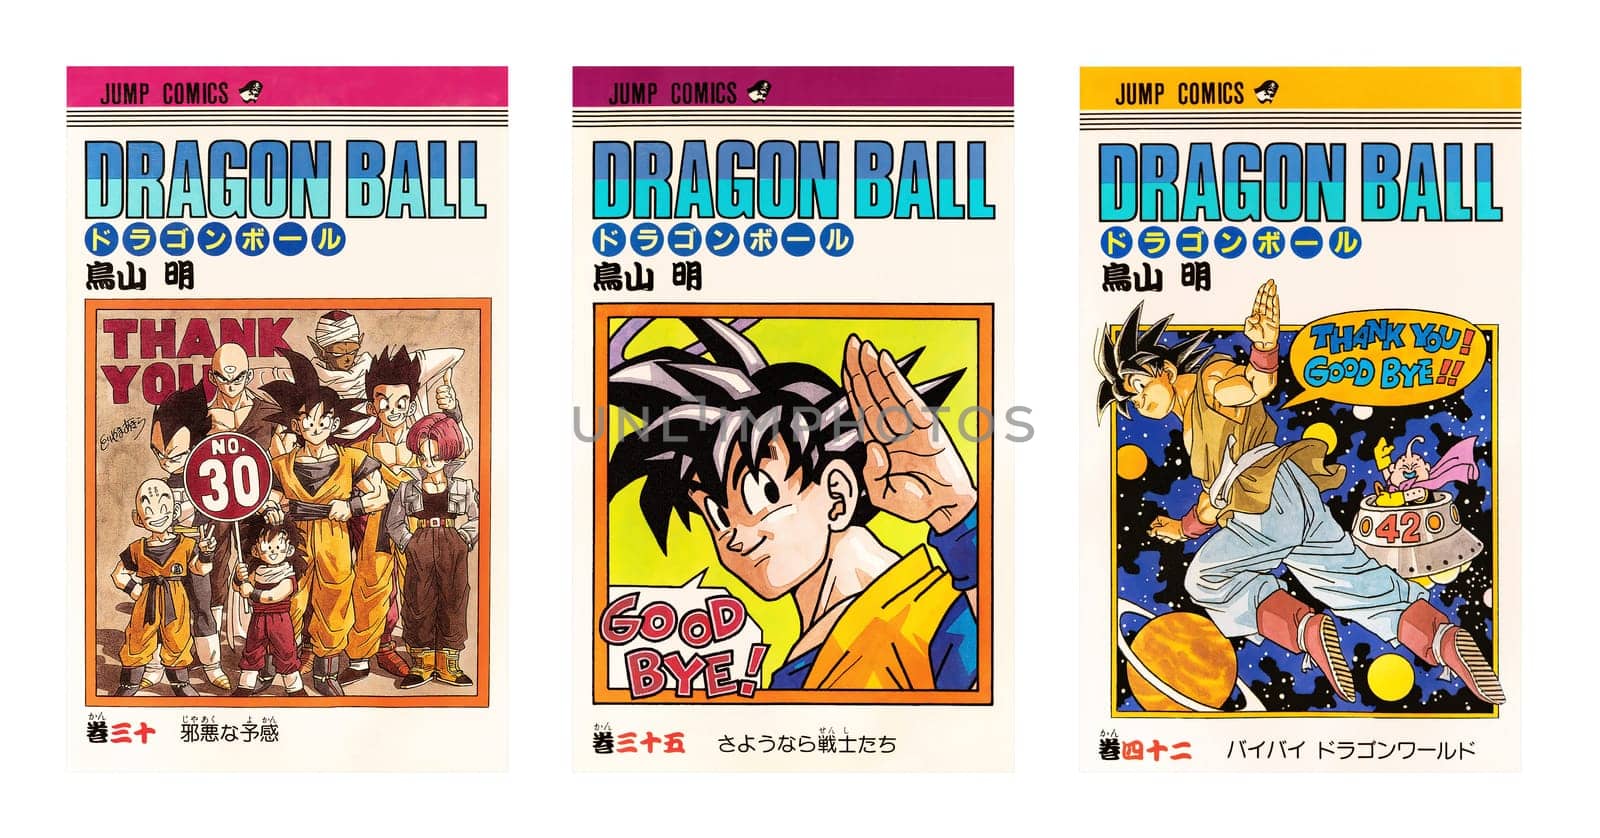 tokyo, japan - aug 04 1995: First covers design of the Japanese manga Dragon Ball illustrated by the late artist Akira Toriyama saying thank you and good bye (1st volume cover and inner cover on left)